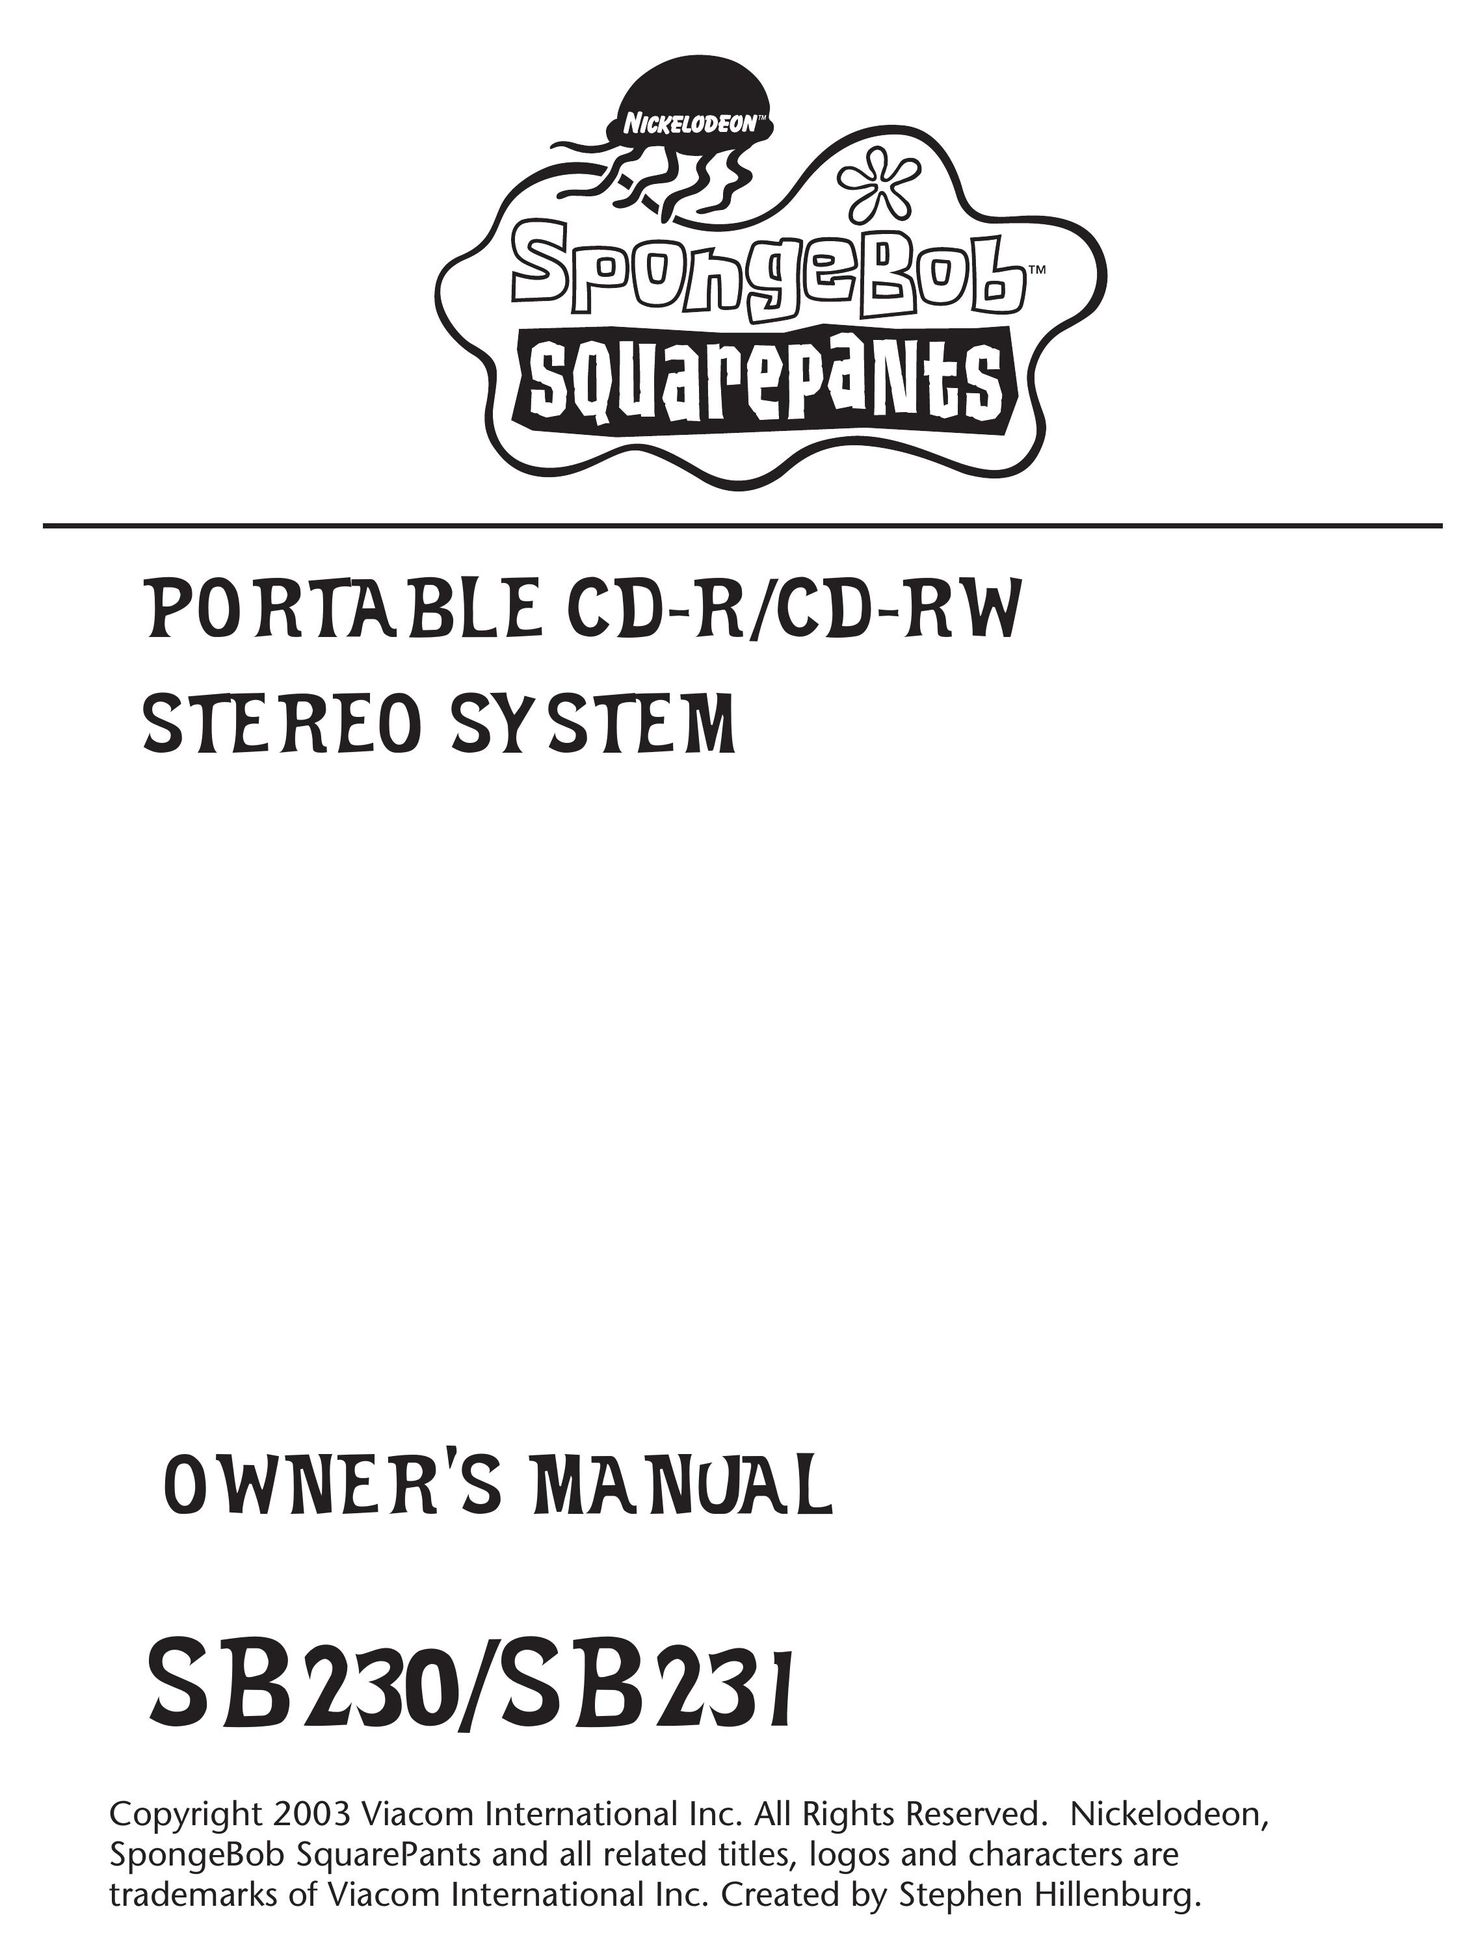 Emerson SB230 Stereo System User Manual